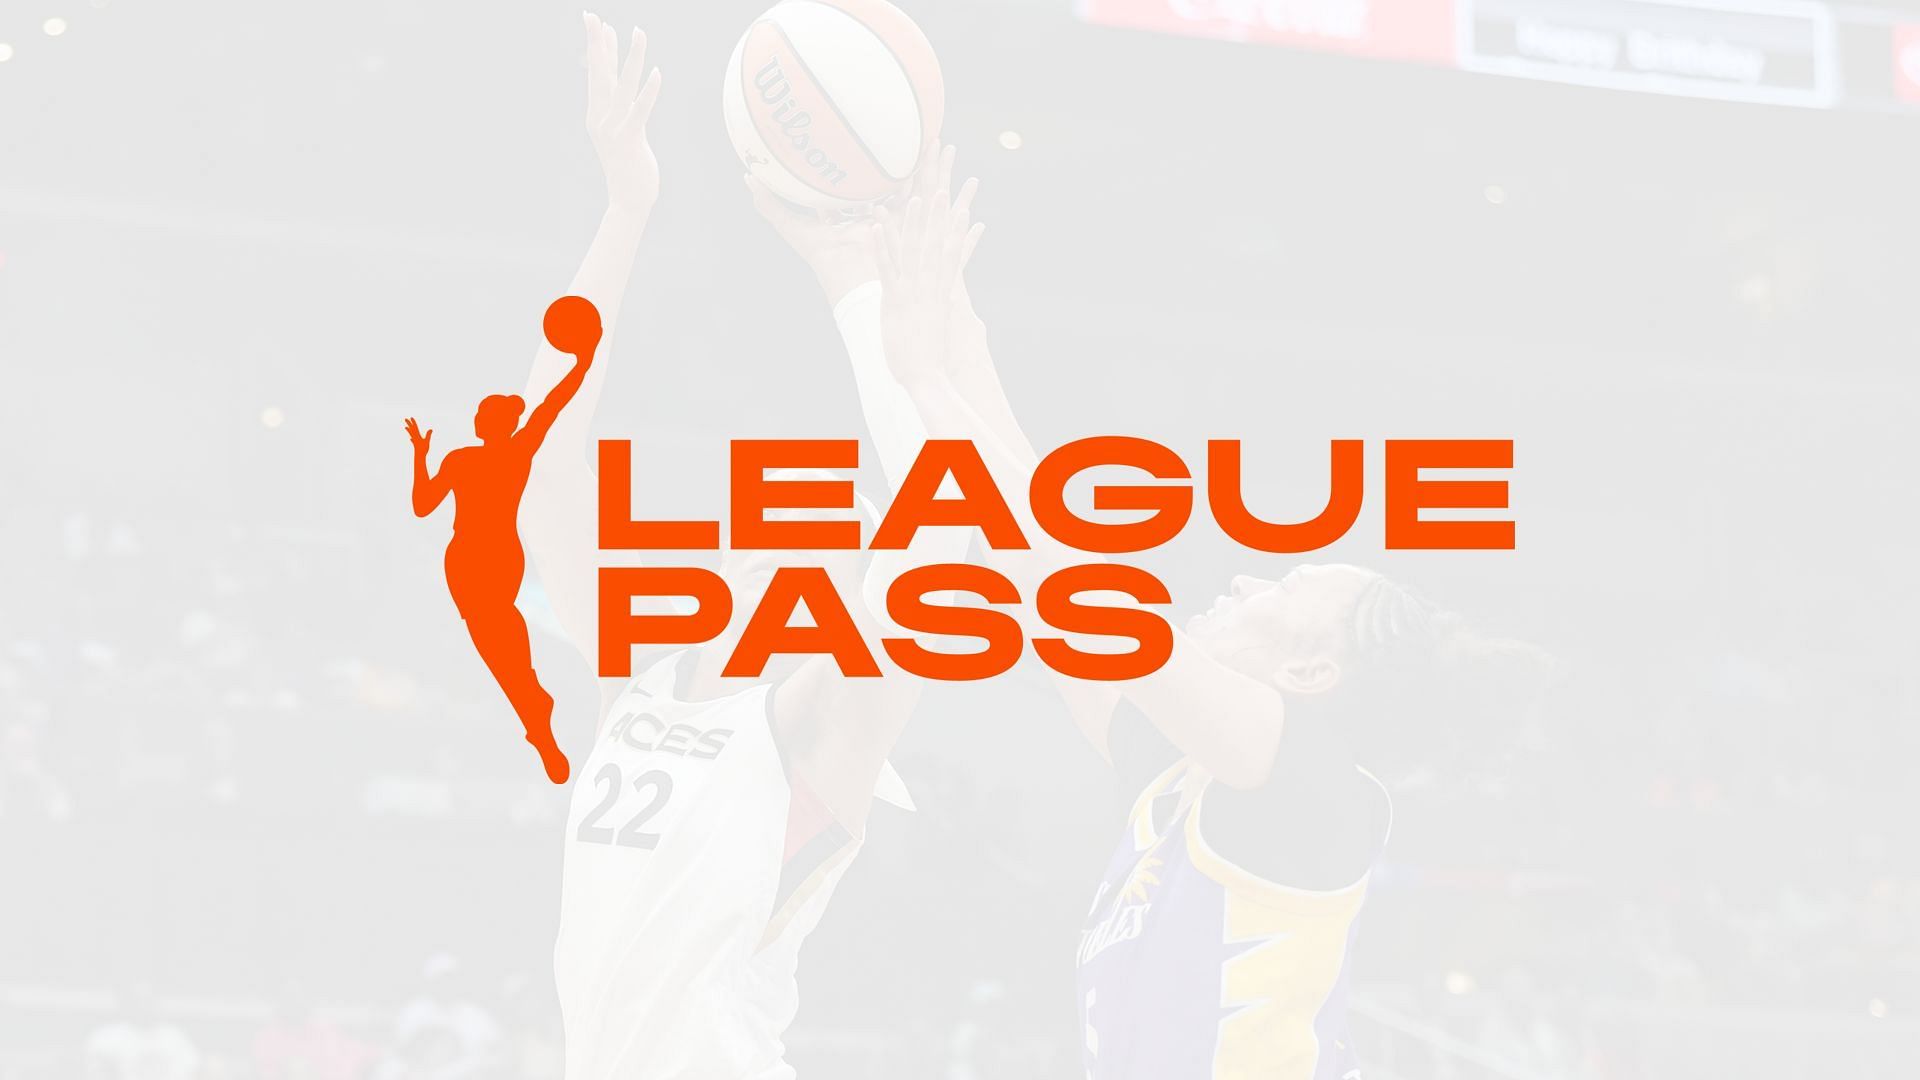 How much is the WNBA League Pass? Taking a closer look at what the pass